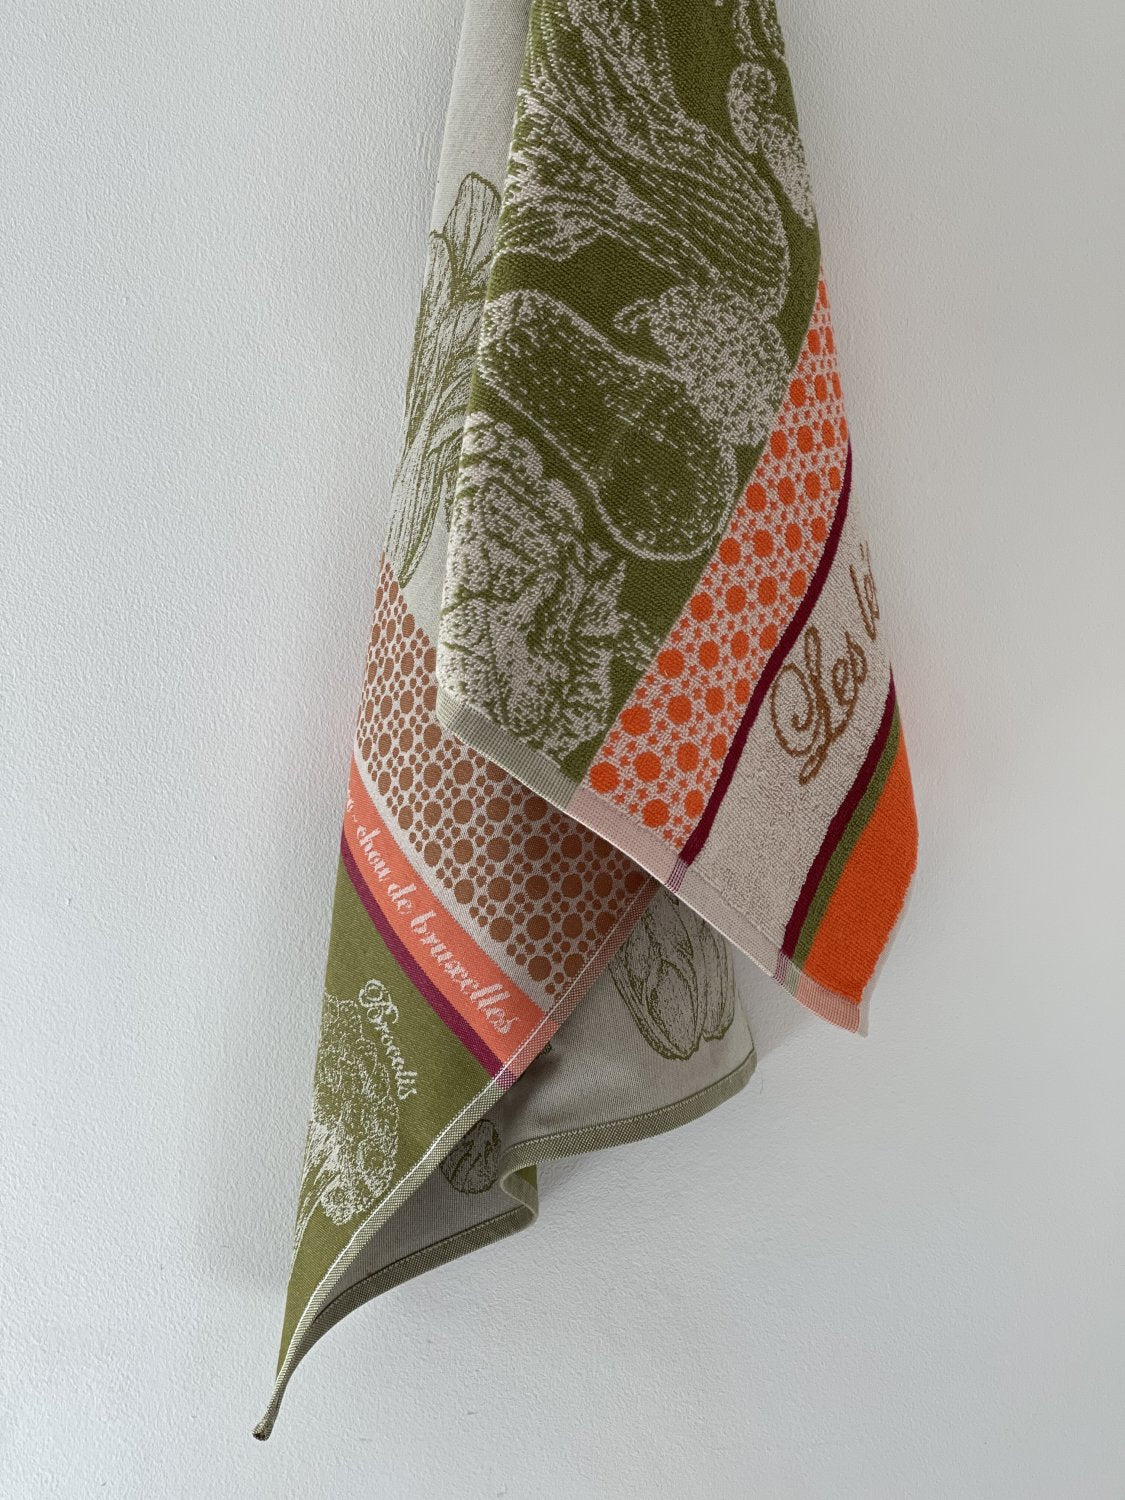 Coucke "Legumes D’Hiver", Cotton terry hand towel. Designed in France.